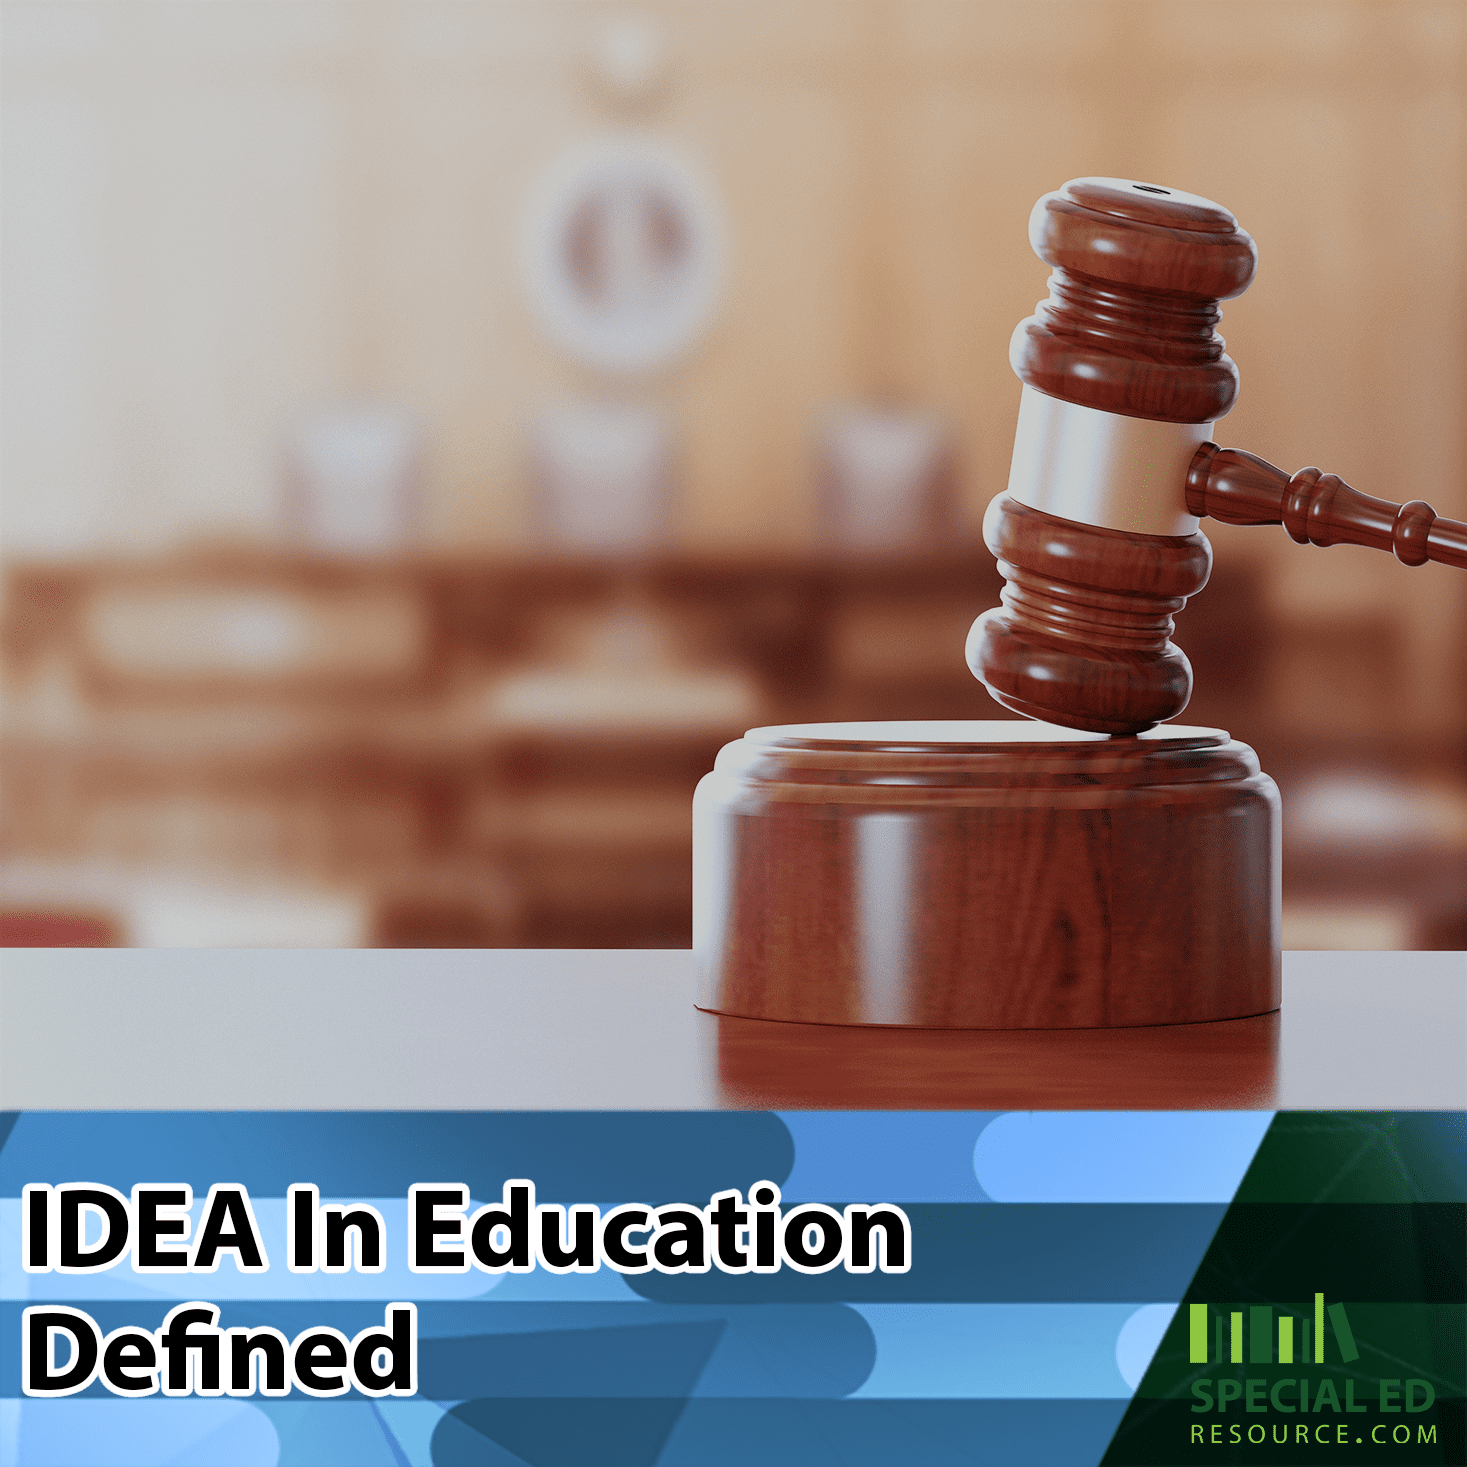 A Gavel in a courtroom to demonstrate IDEA the individuals with disabilities education act for special education.